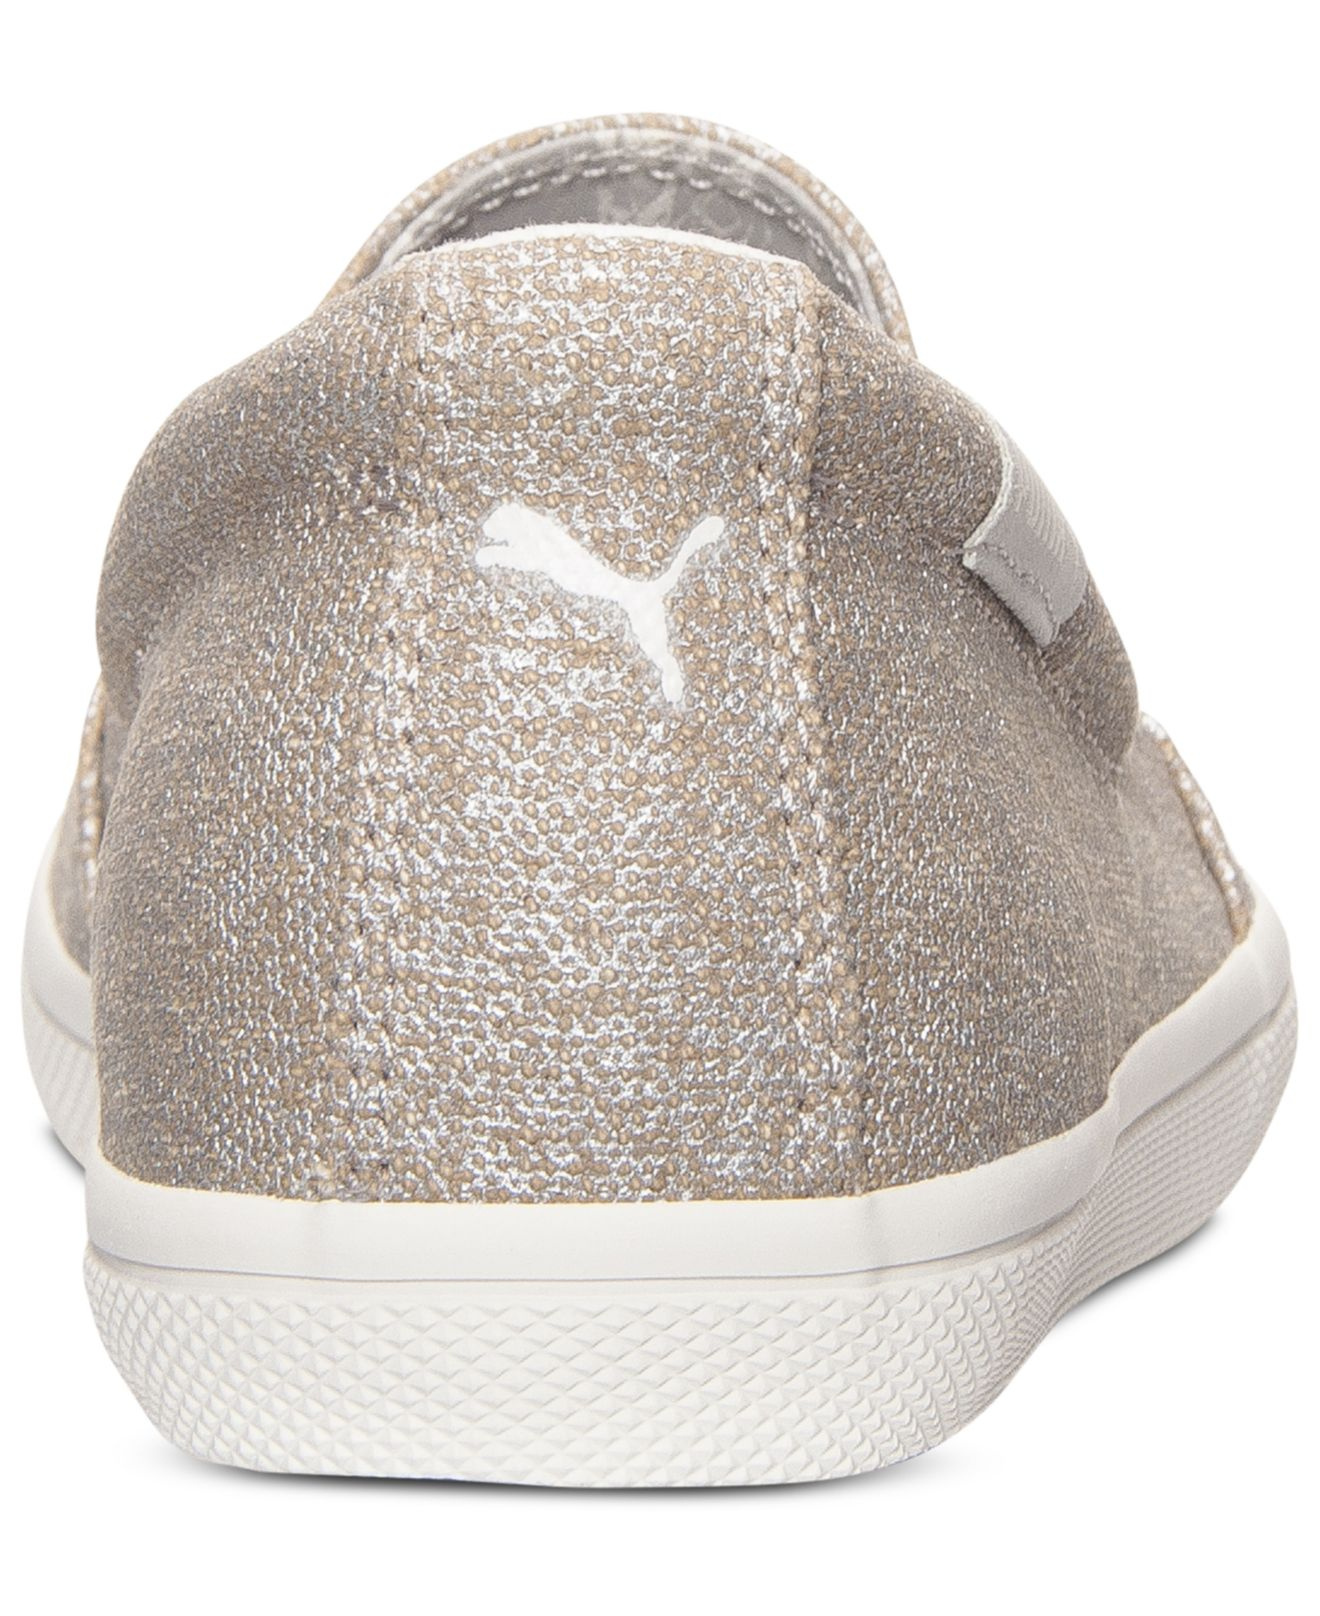 puma women's pc extreme vulc slip on casual sneakers